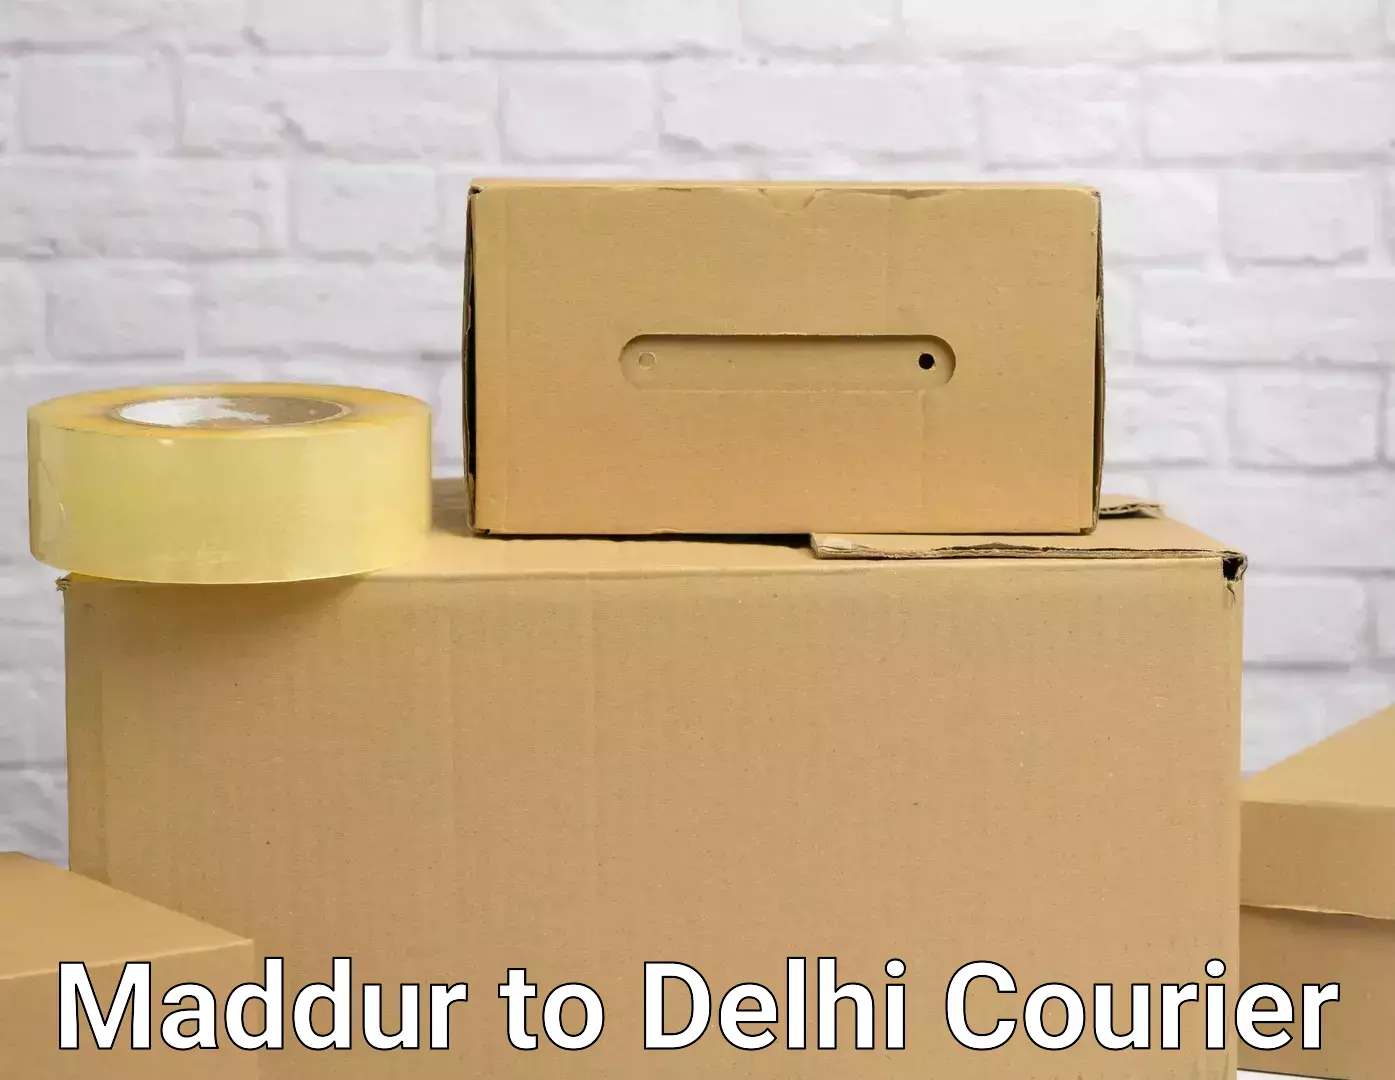 Moving and storage services Maddur to Delhi